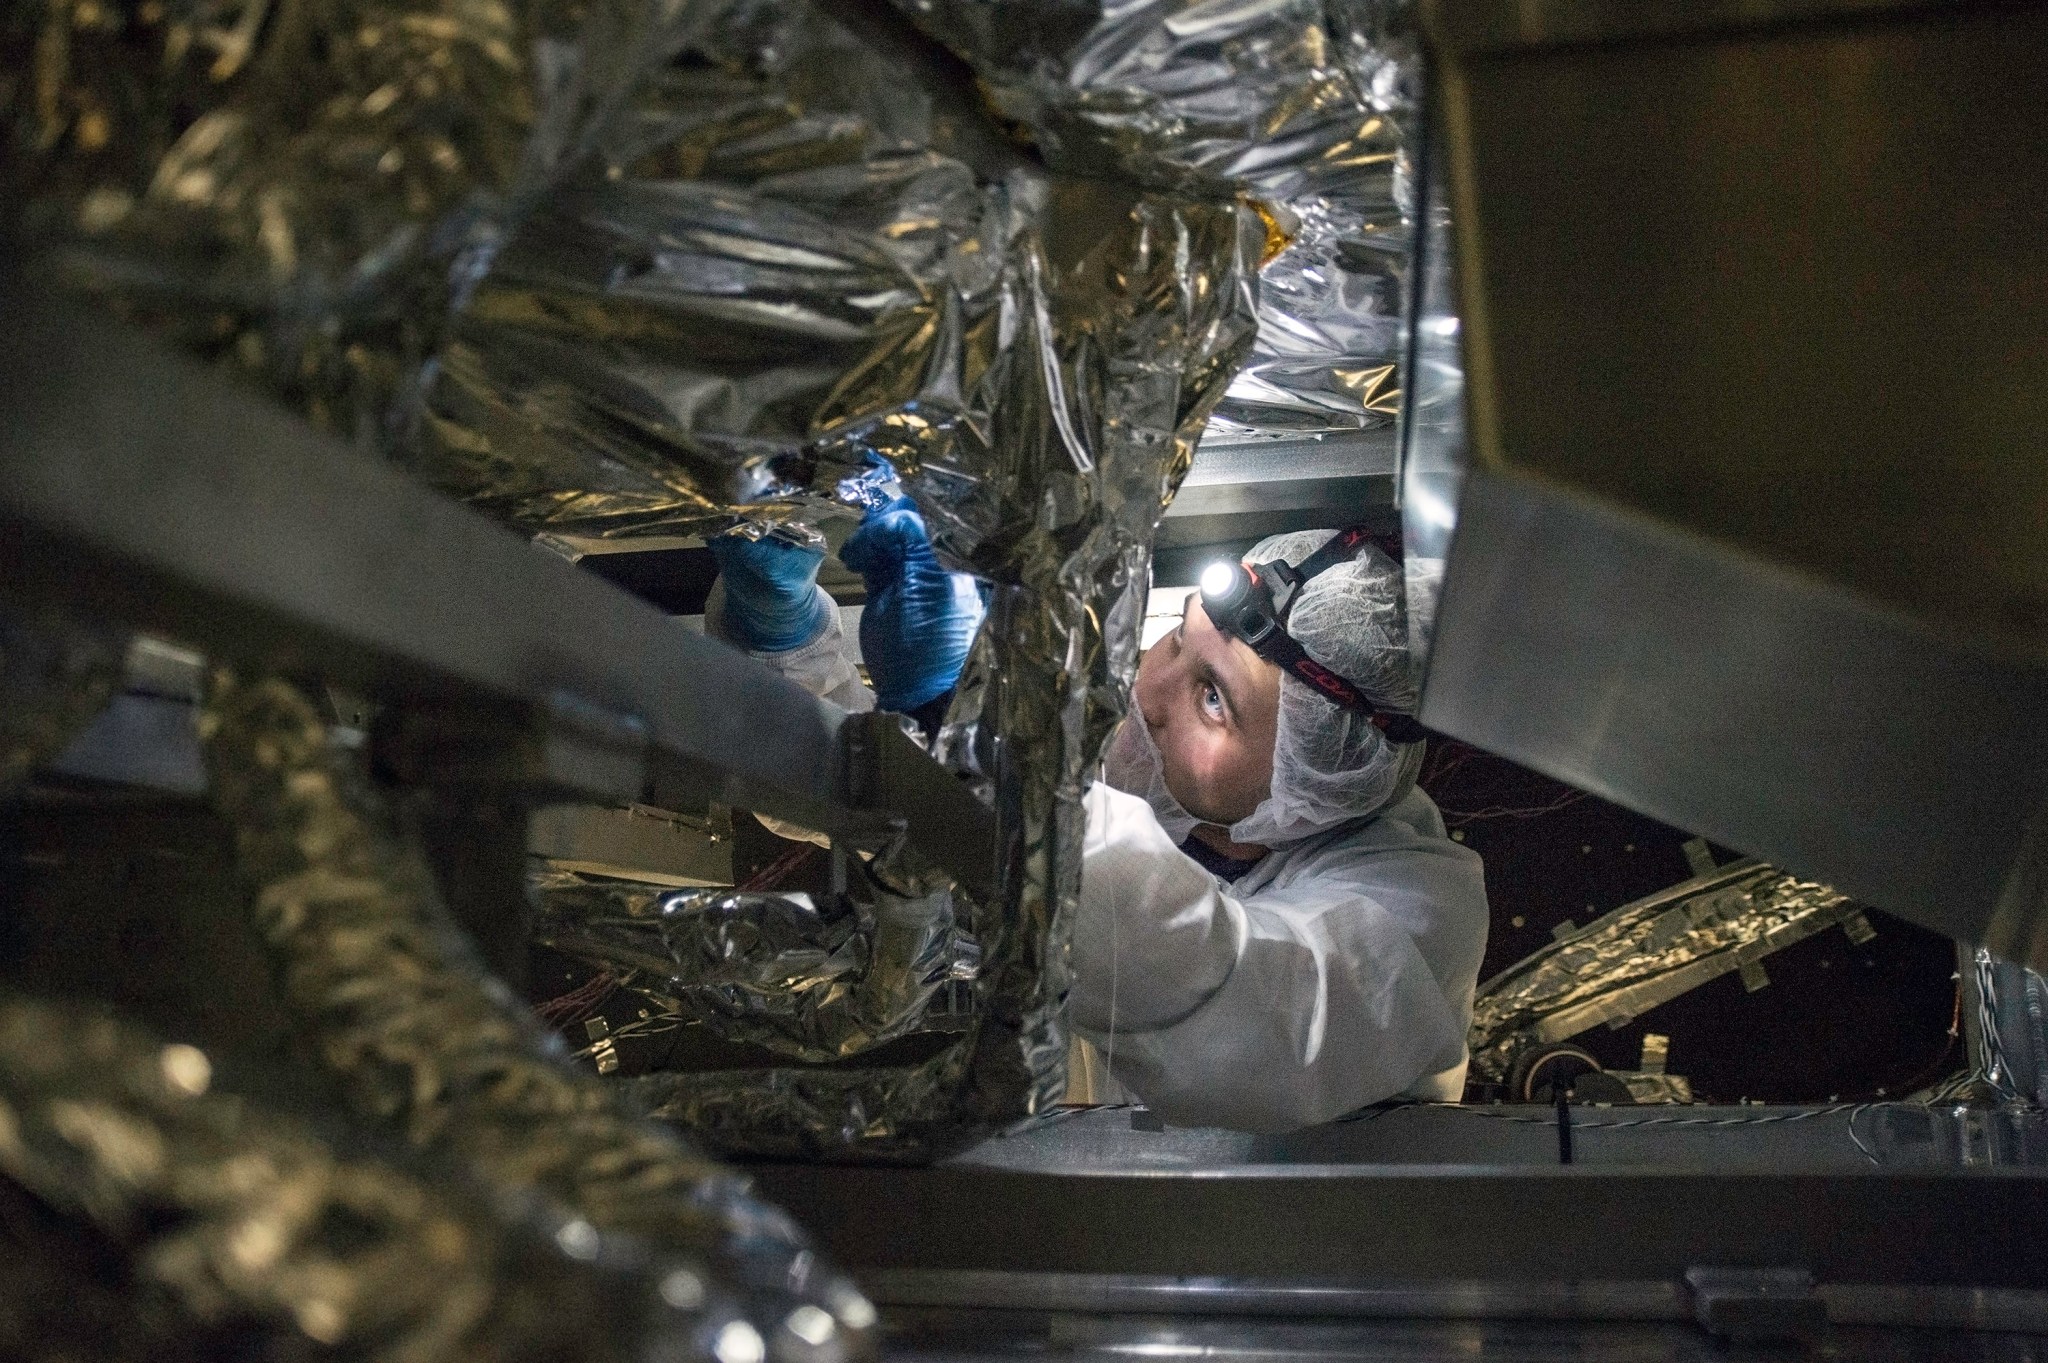 A technician works with a flashlight under the test model